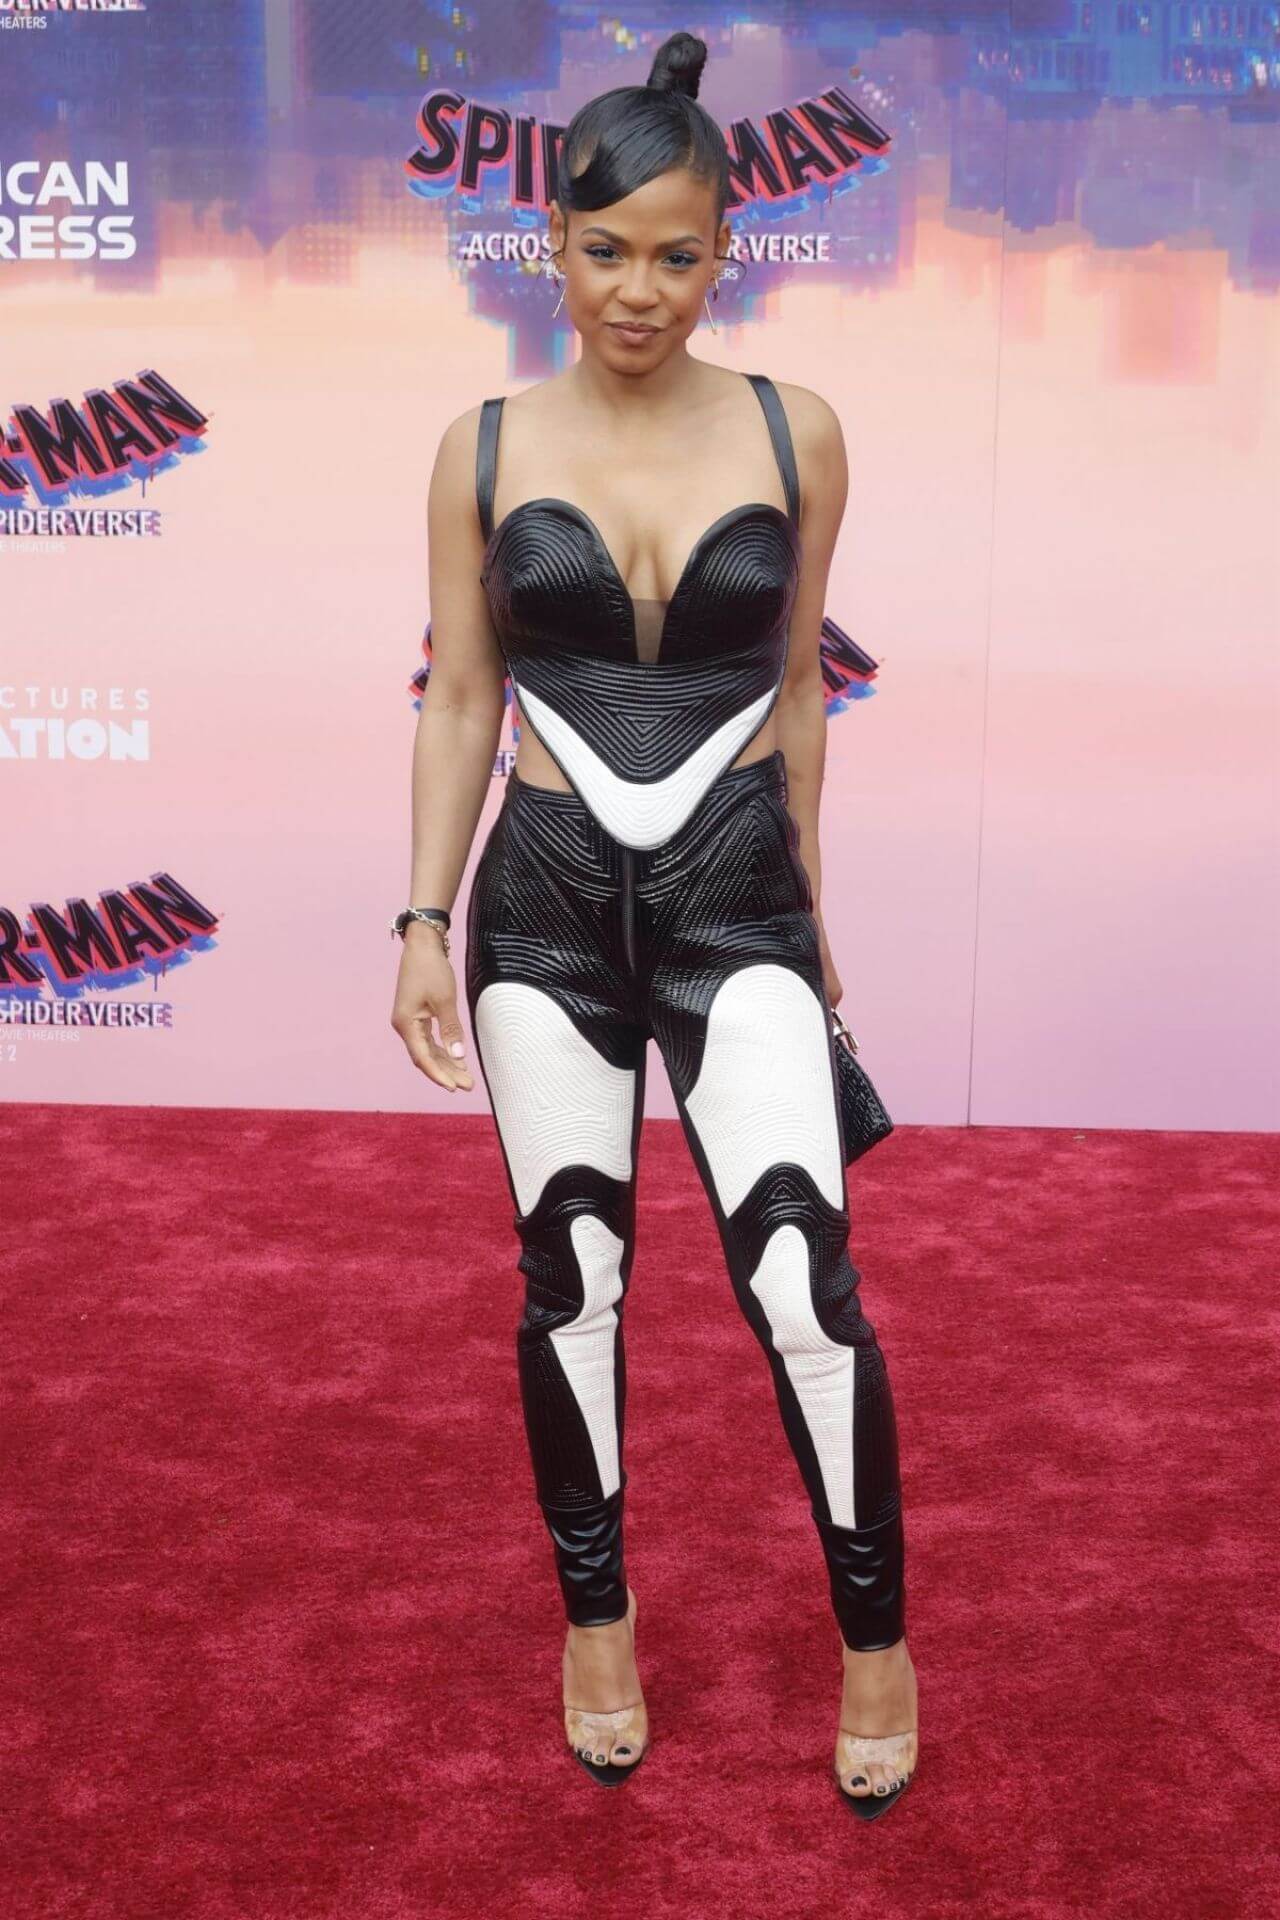 Christina Milian  In Black & White Co-Ord Set At “Spider-Man: Across The Spider-Verse” Premiere in Los Angeles